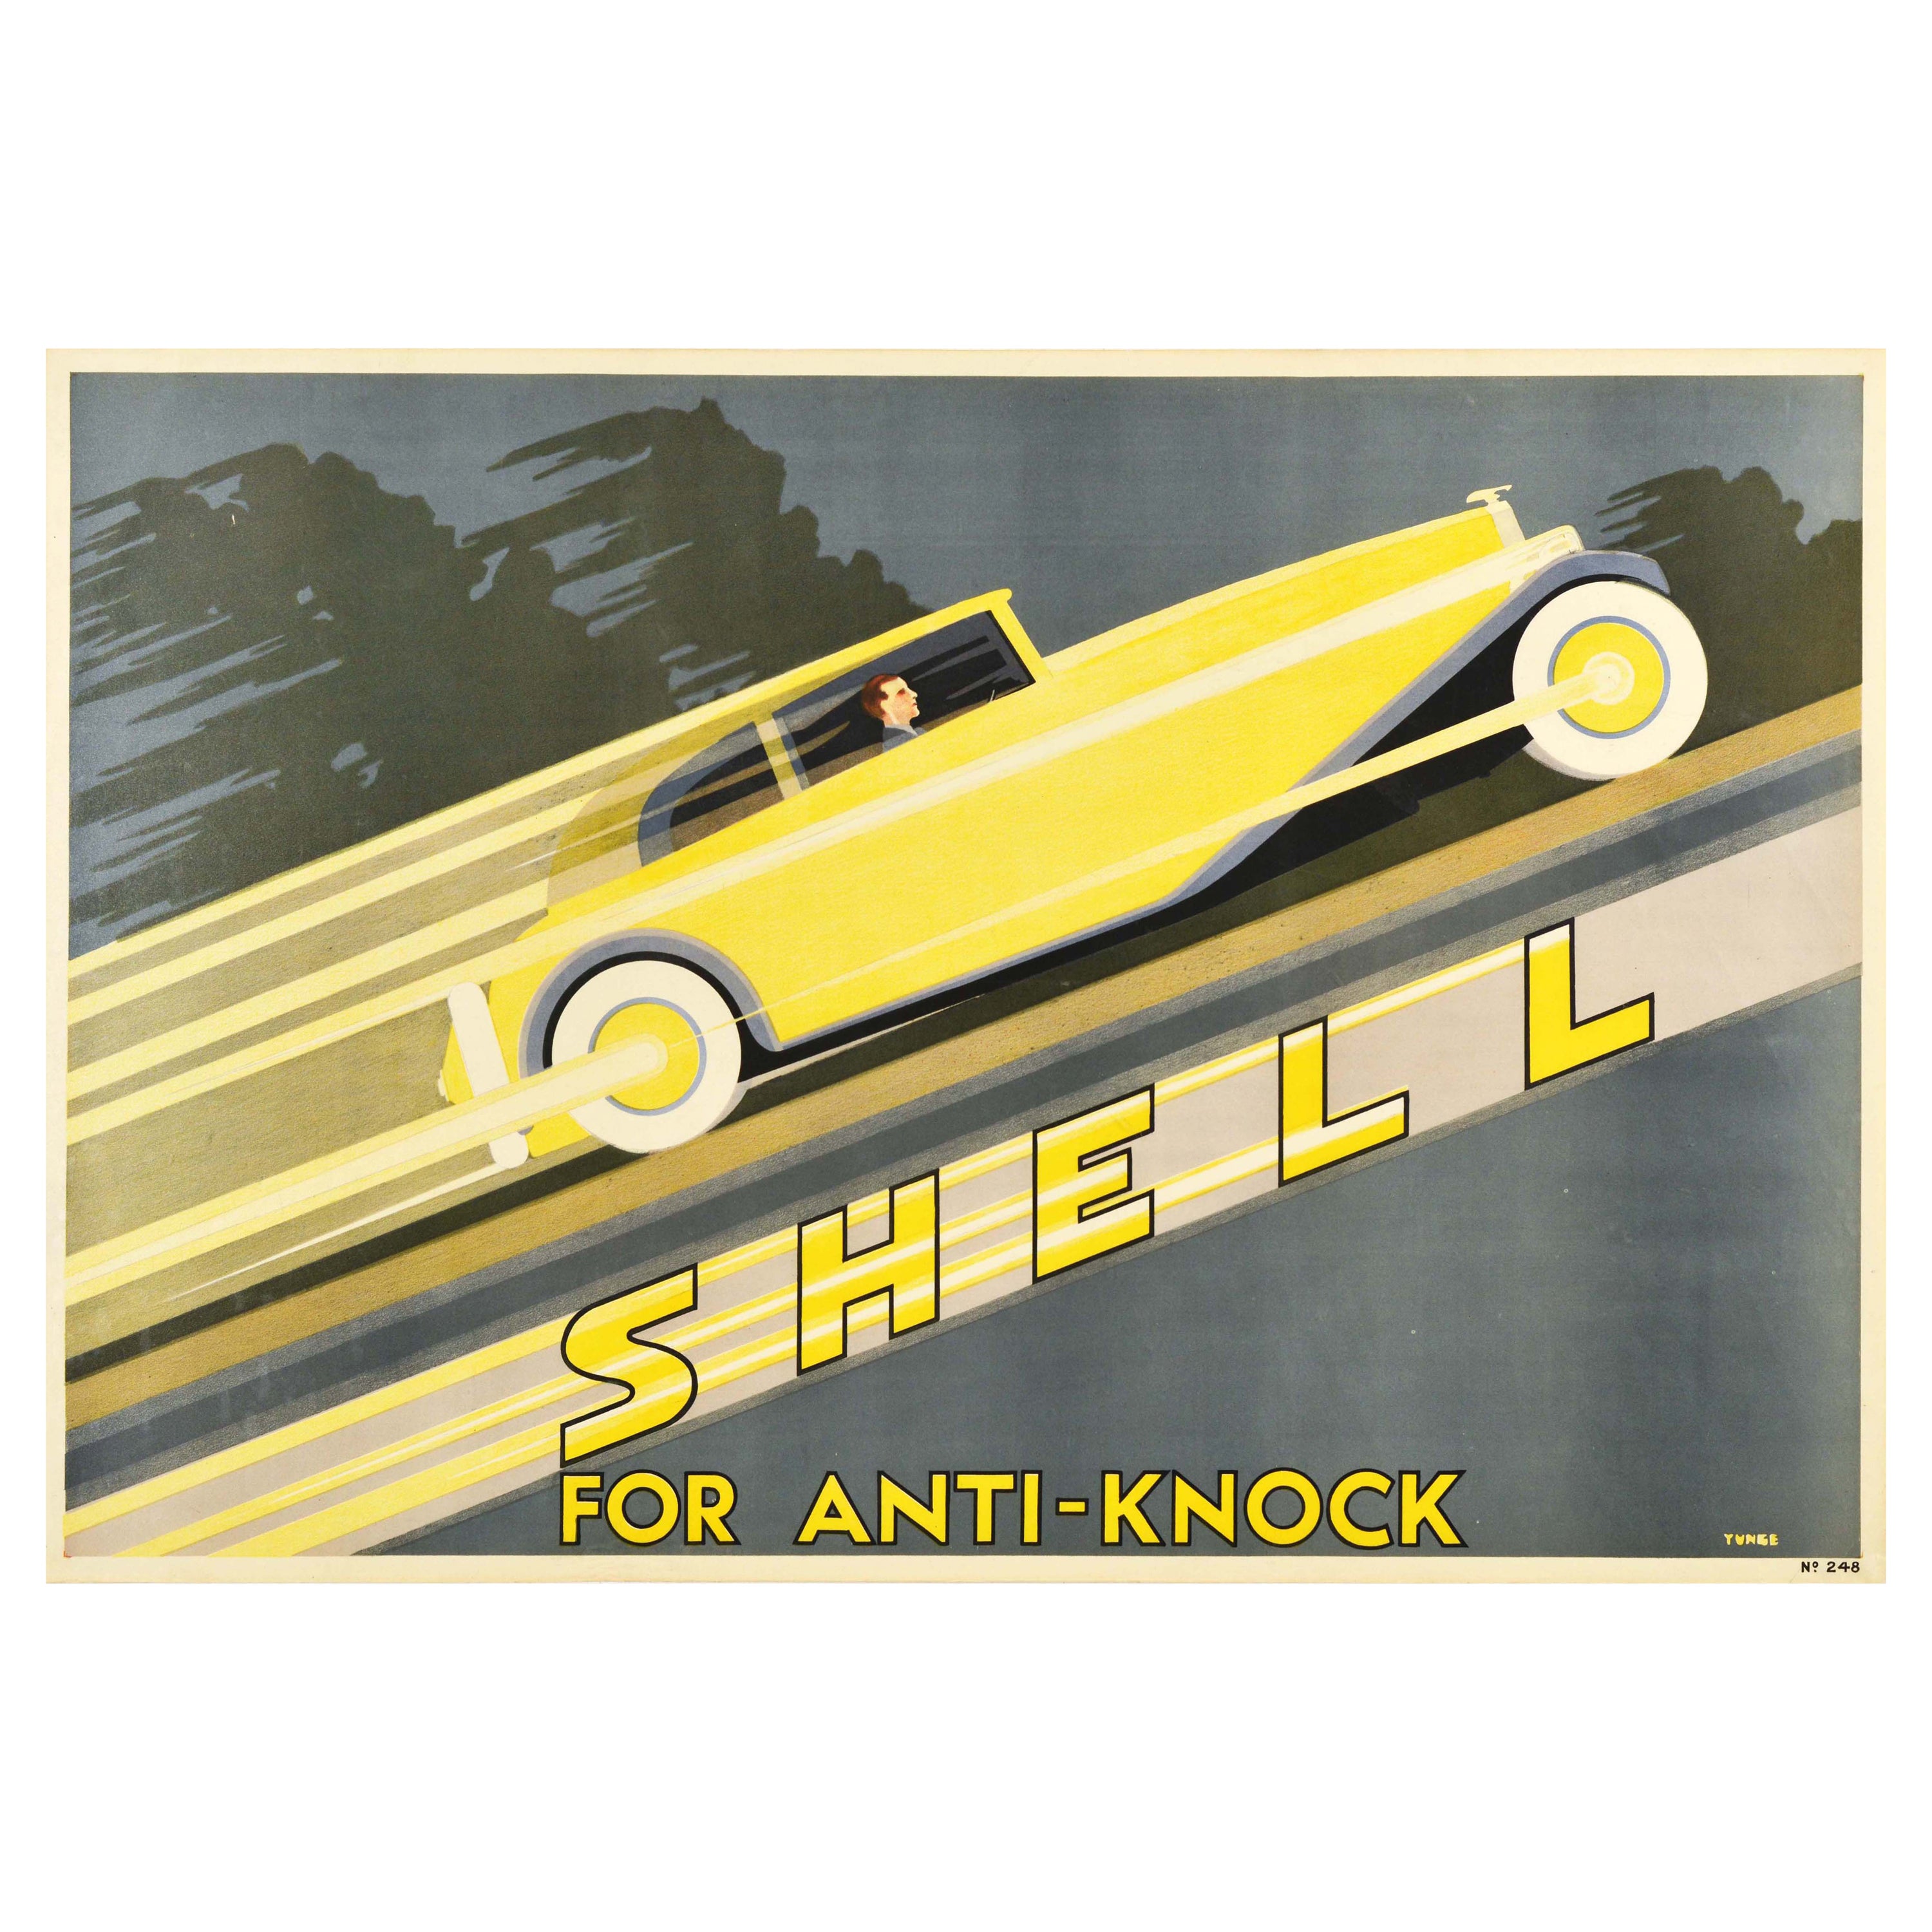 Original Vintage Advertising Poster Shell For Anti Knock Rolls Royce Classic Car